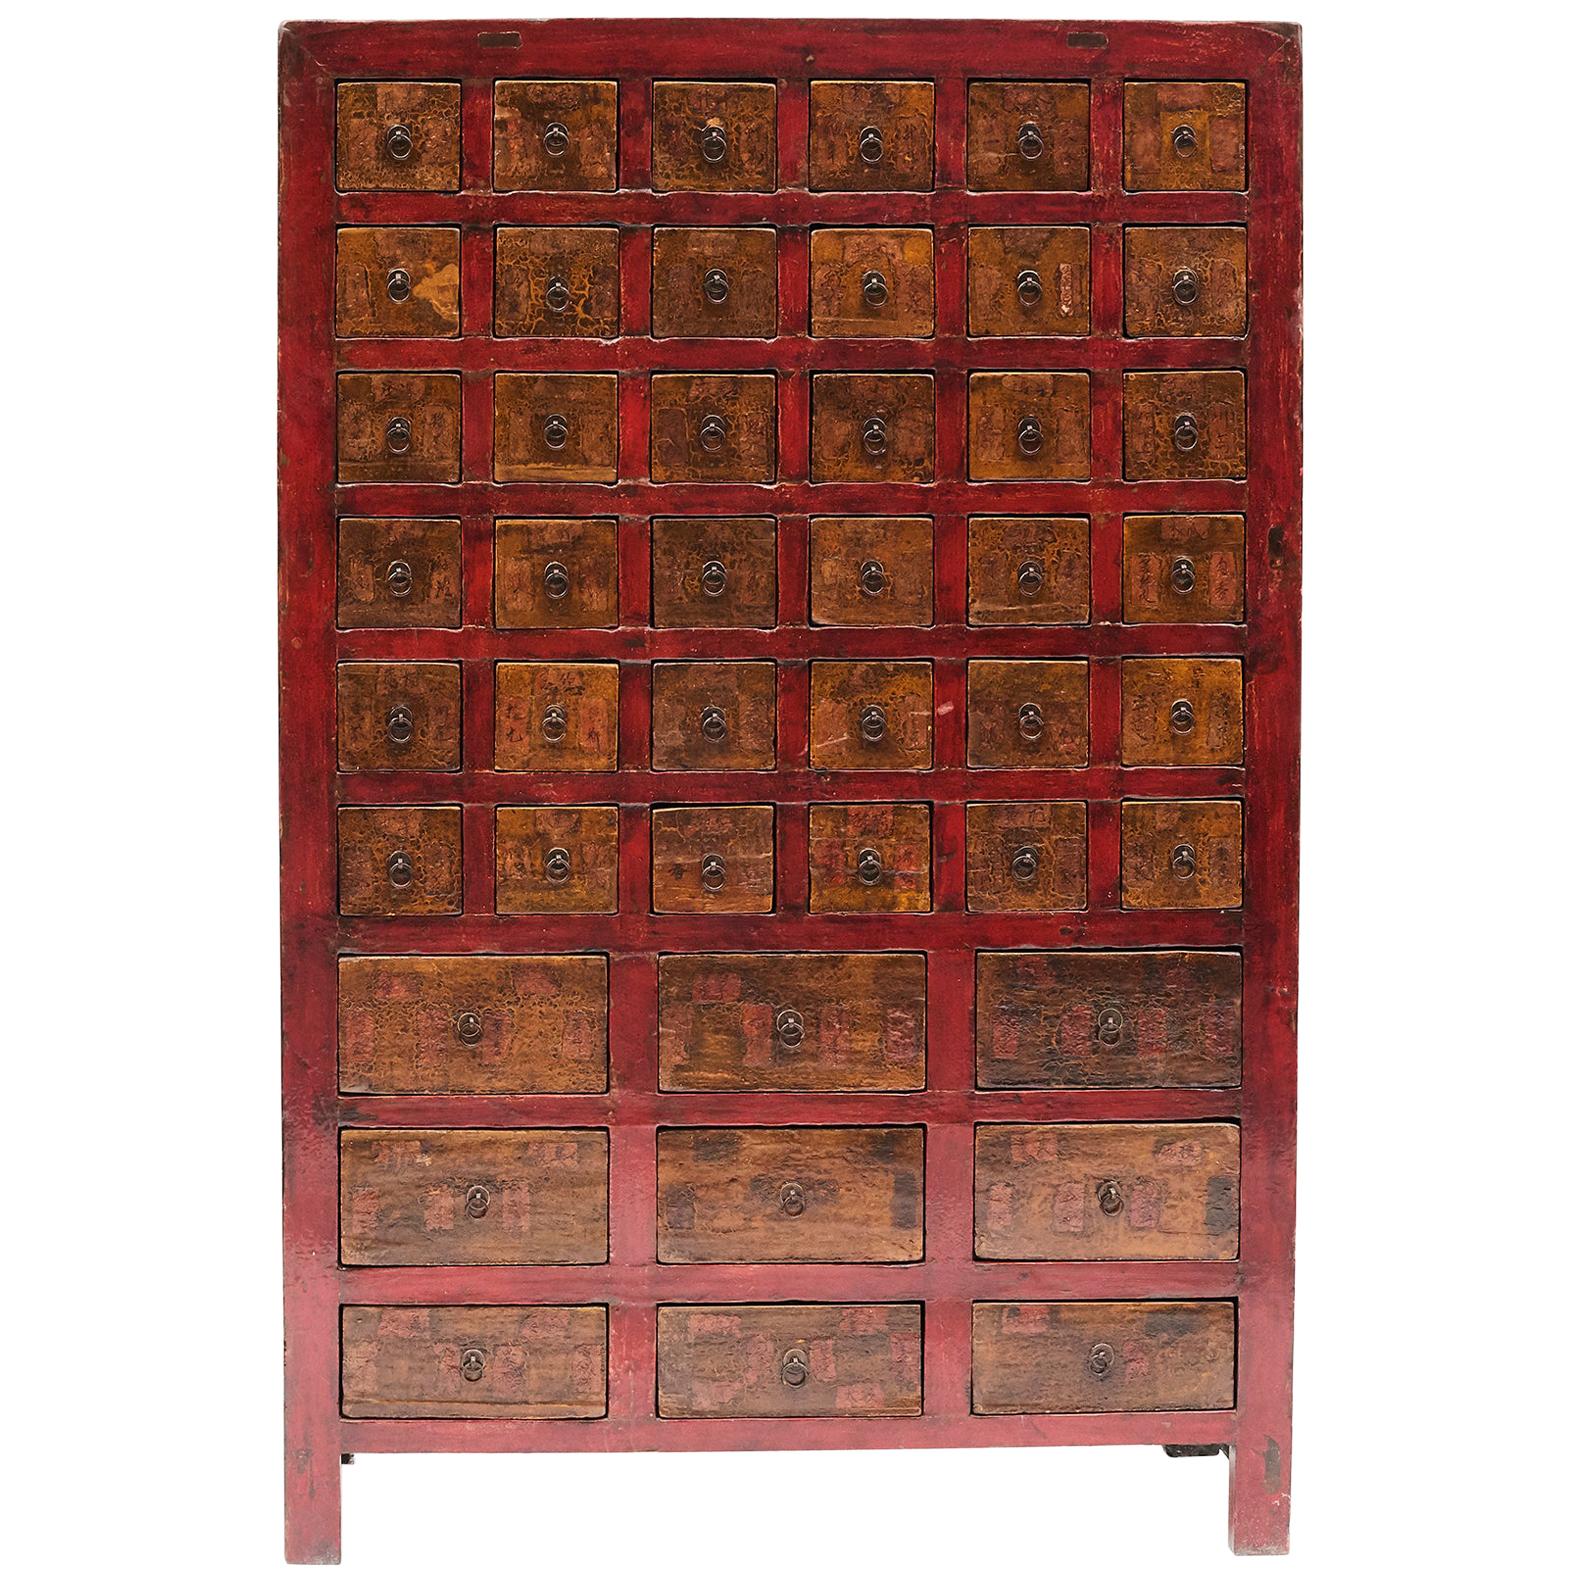 19th Century Chinese Apothecary Medicine Cabinet with 45 Drawers For Sale